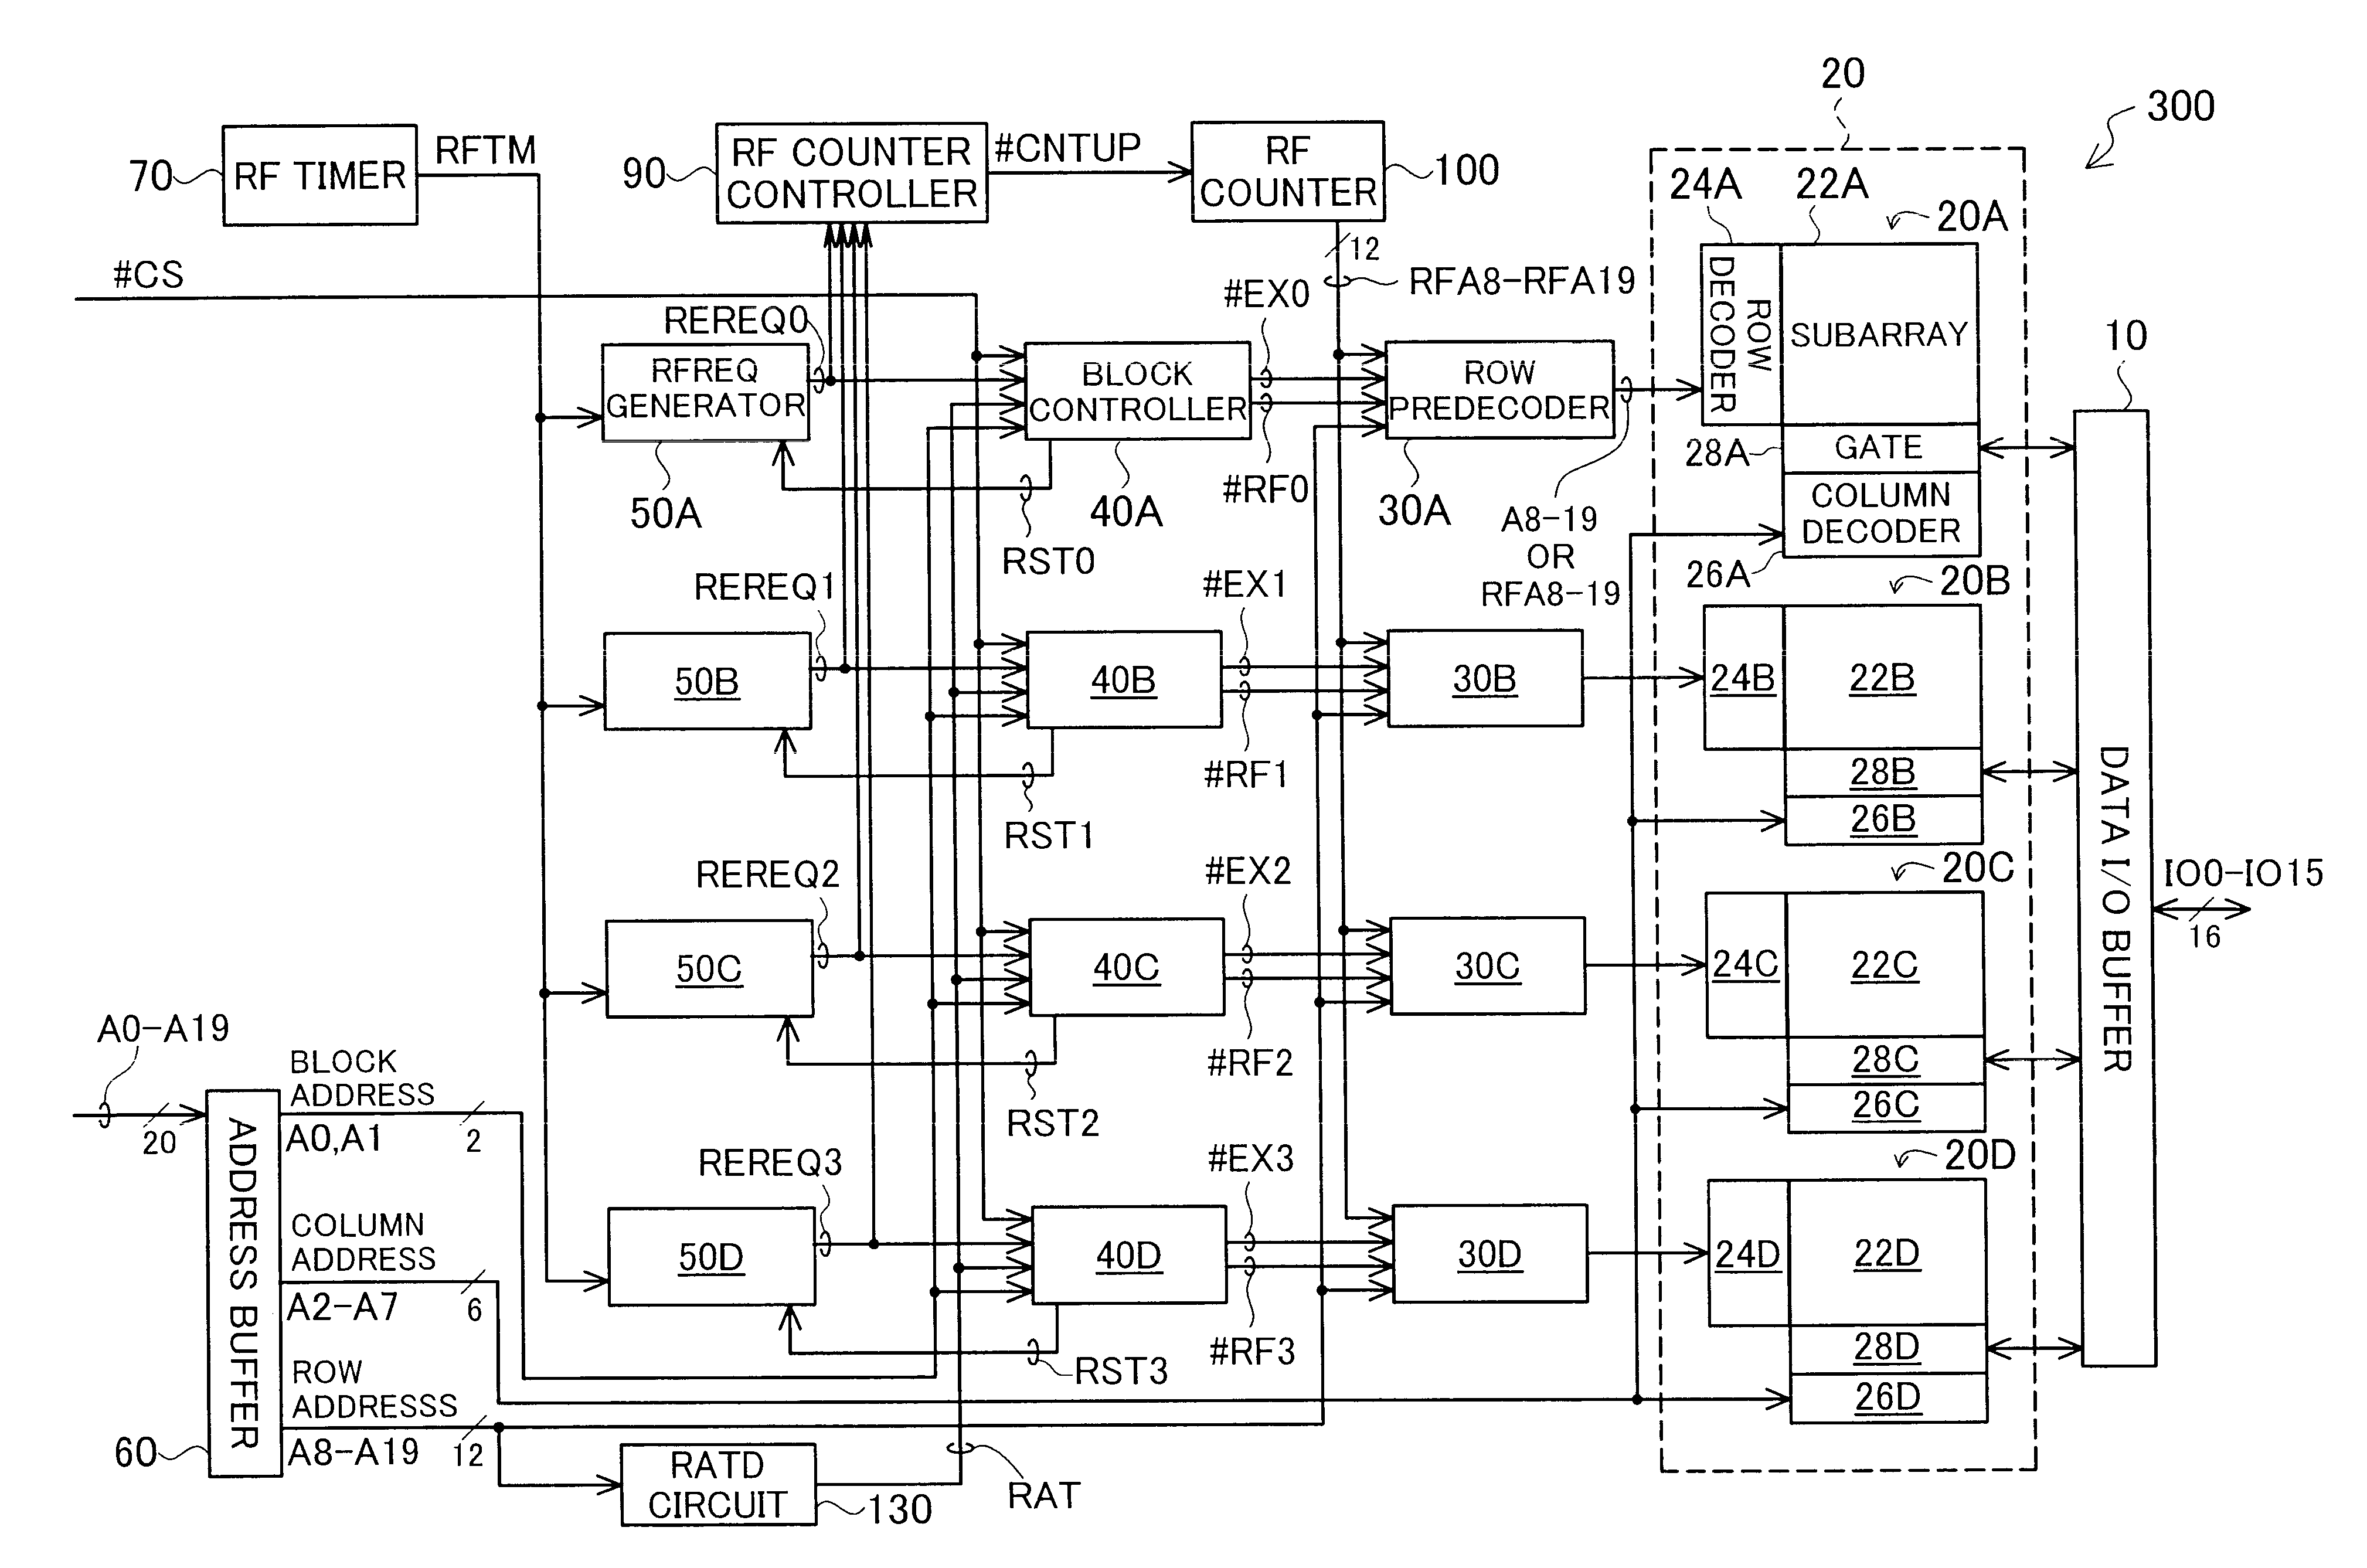 Activation of word lines in semiconductor memory device